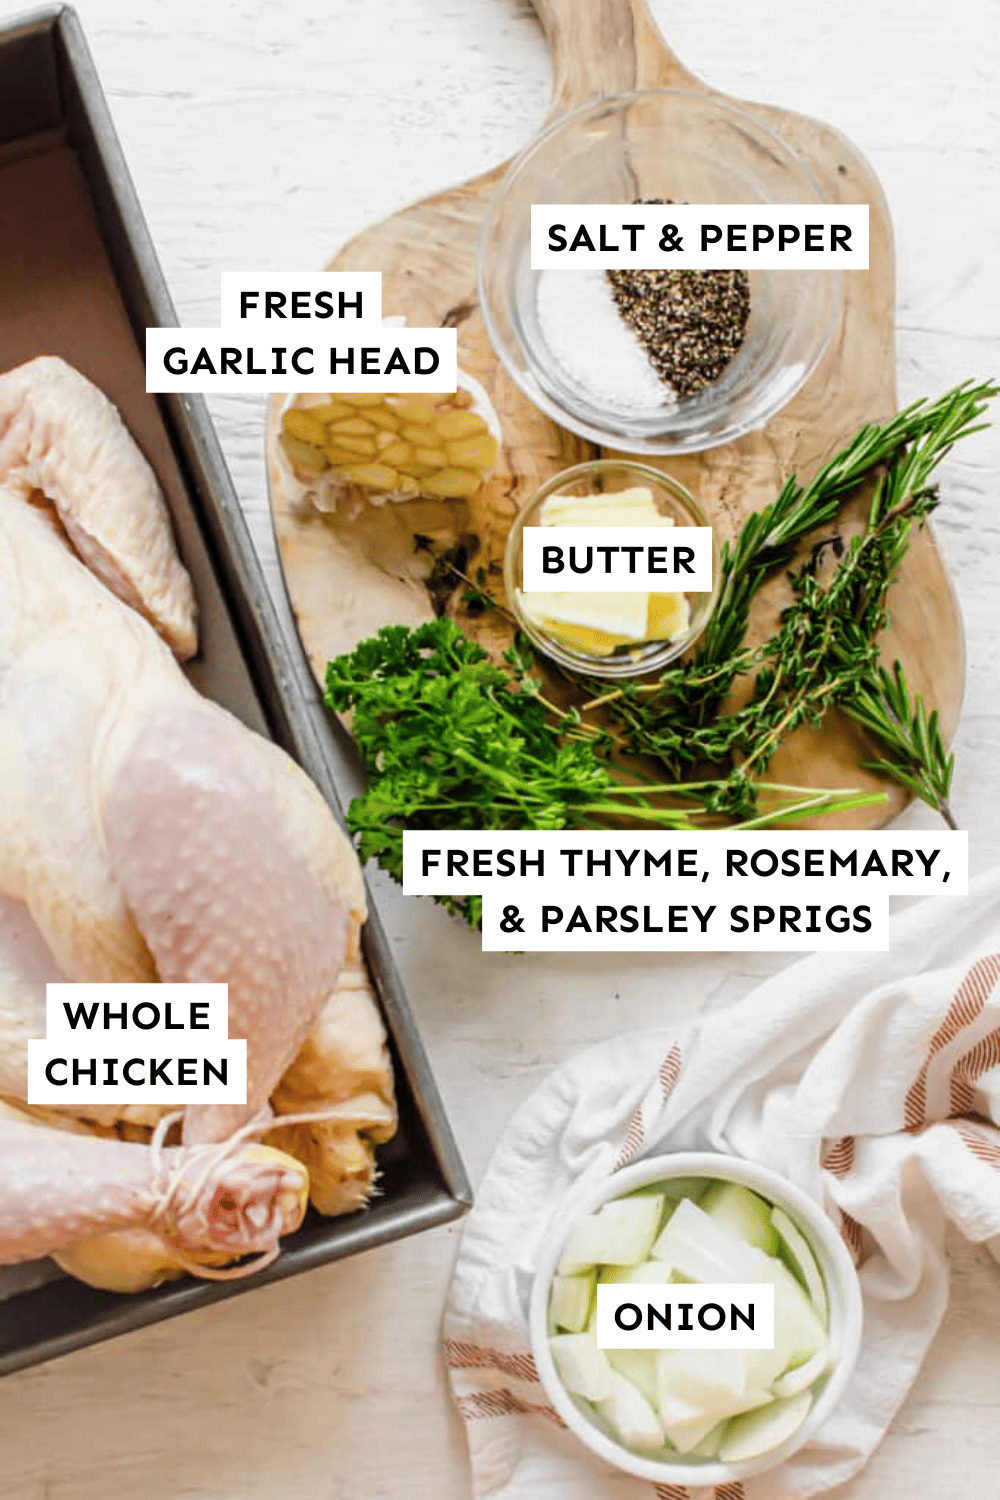 Ingredients for cooking a whole chicken in the Slow Cooker, laid out on a counter and labeled.